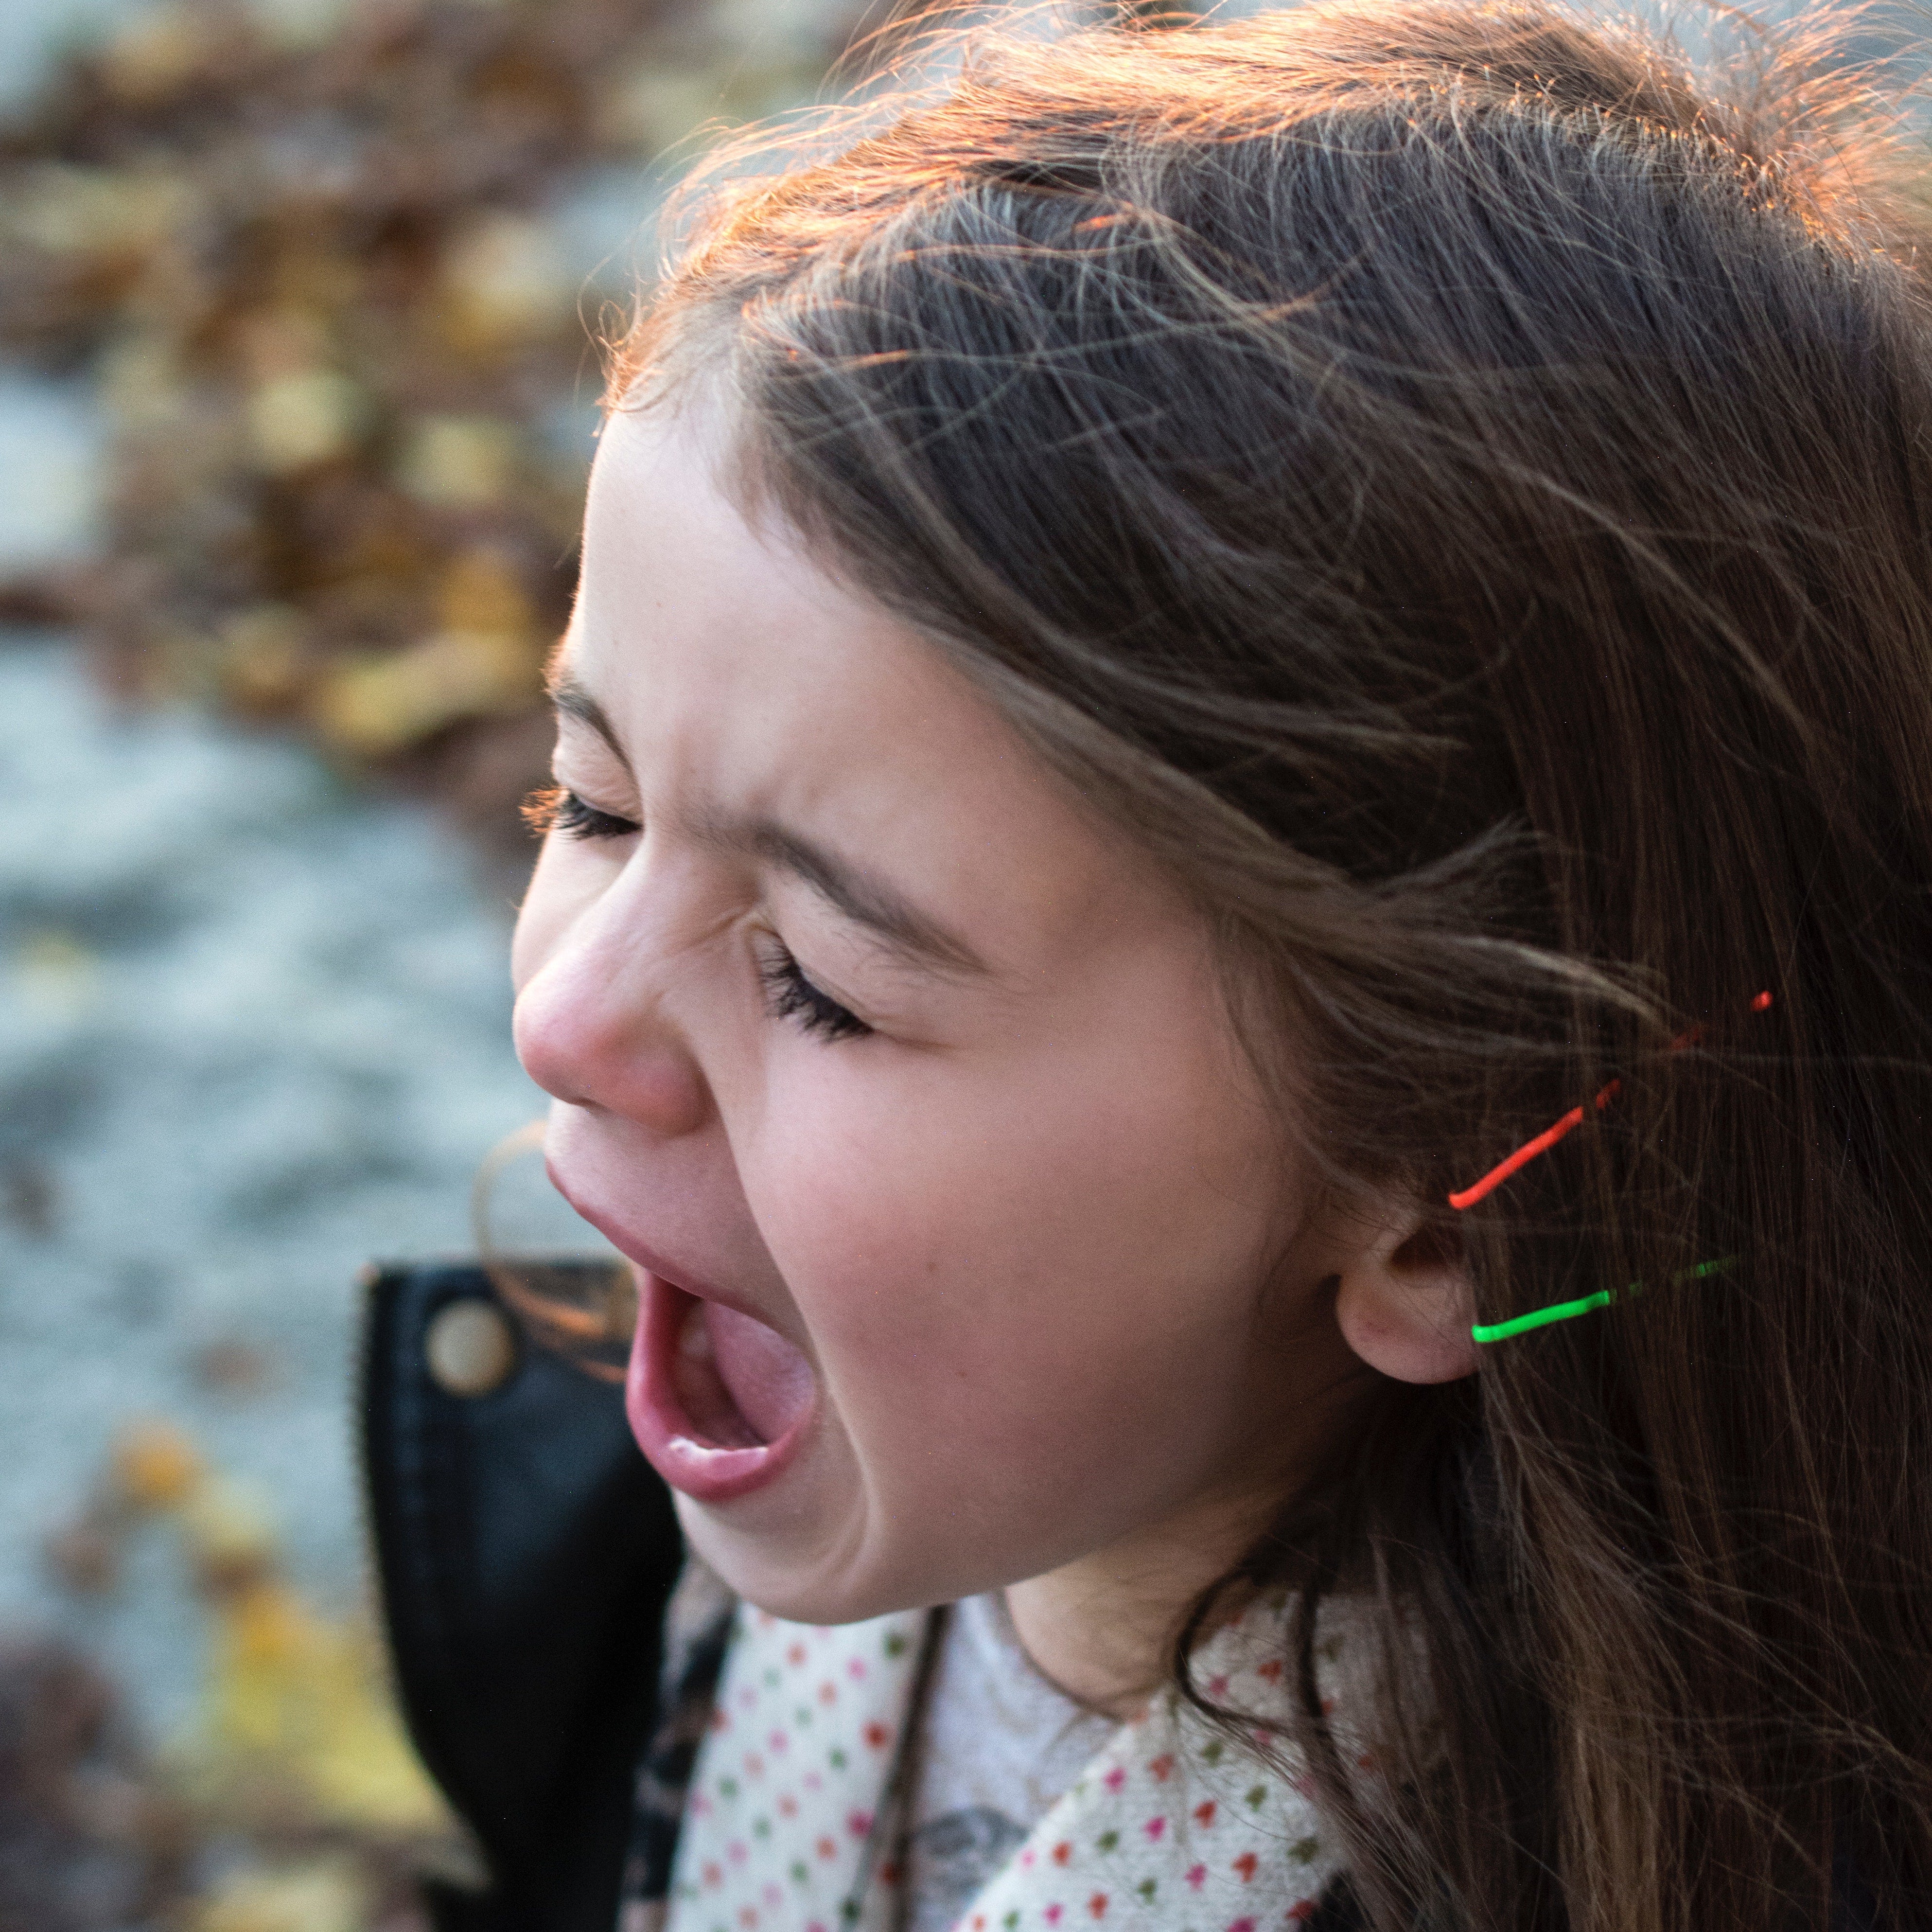 How to Handle Temper Tantrums Without Losing Your Cool